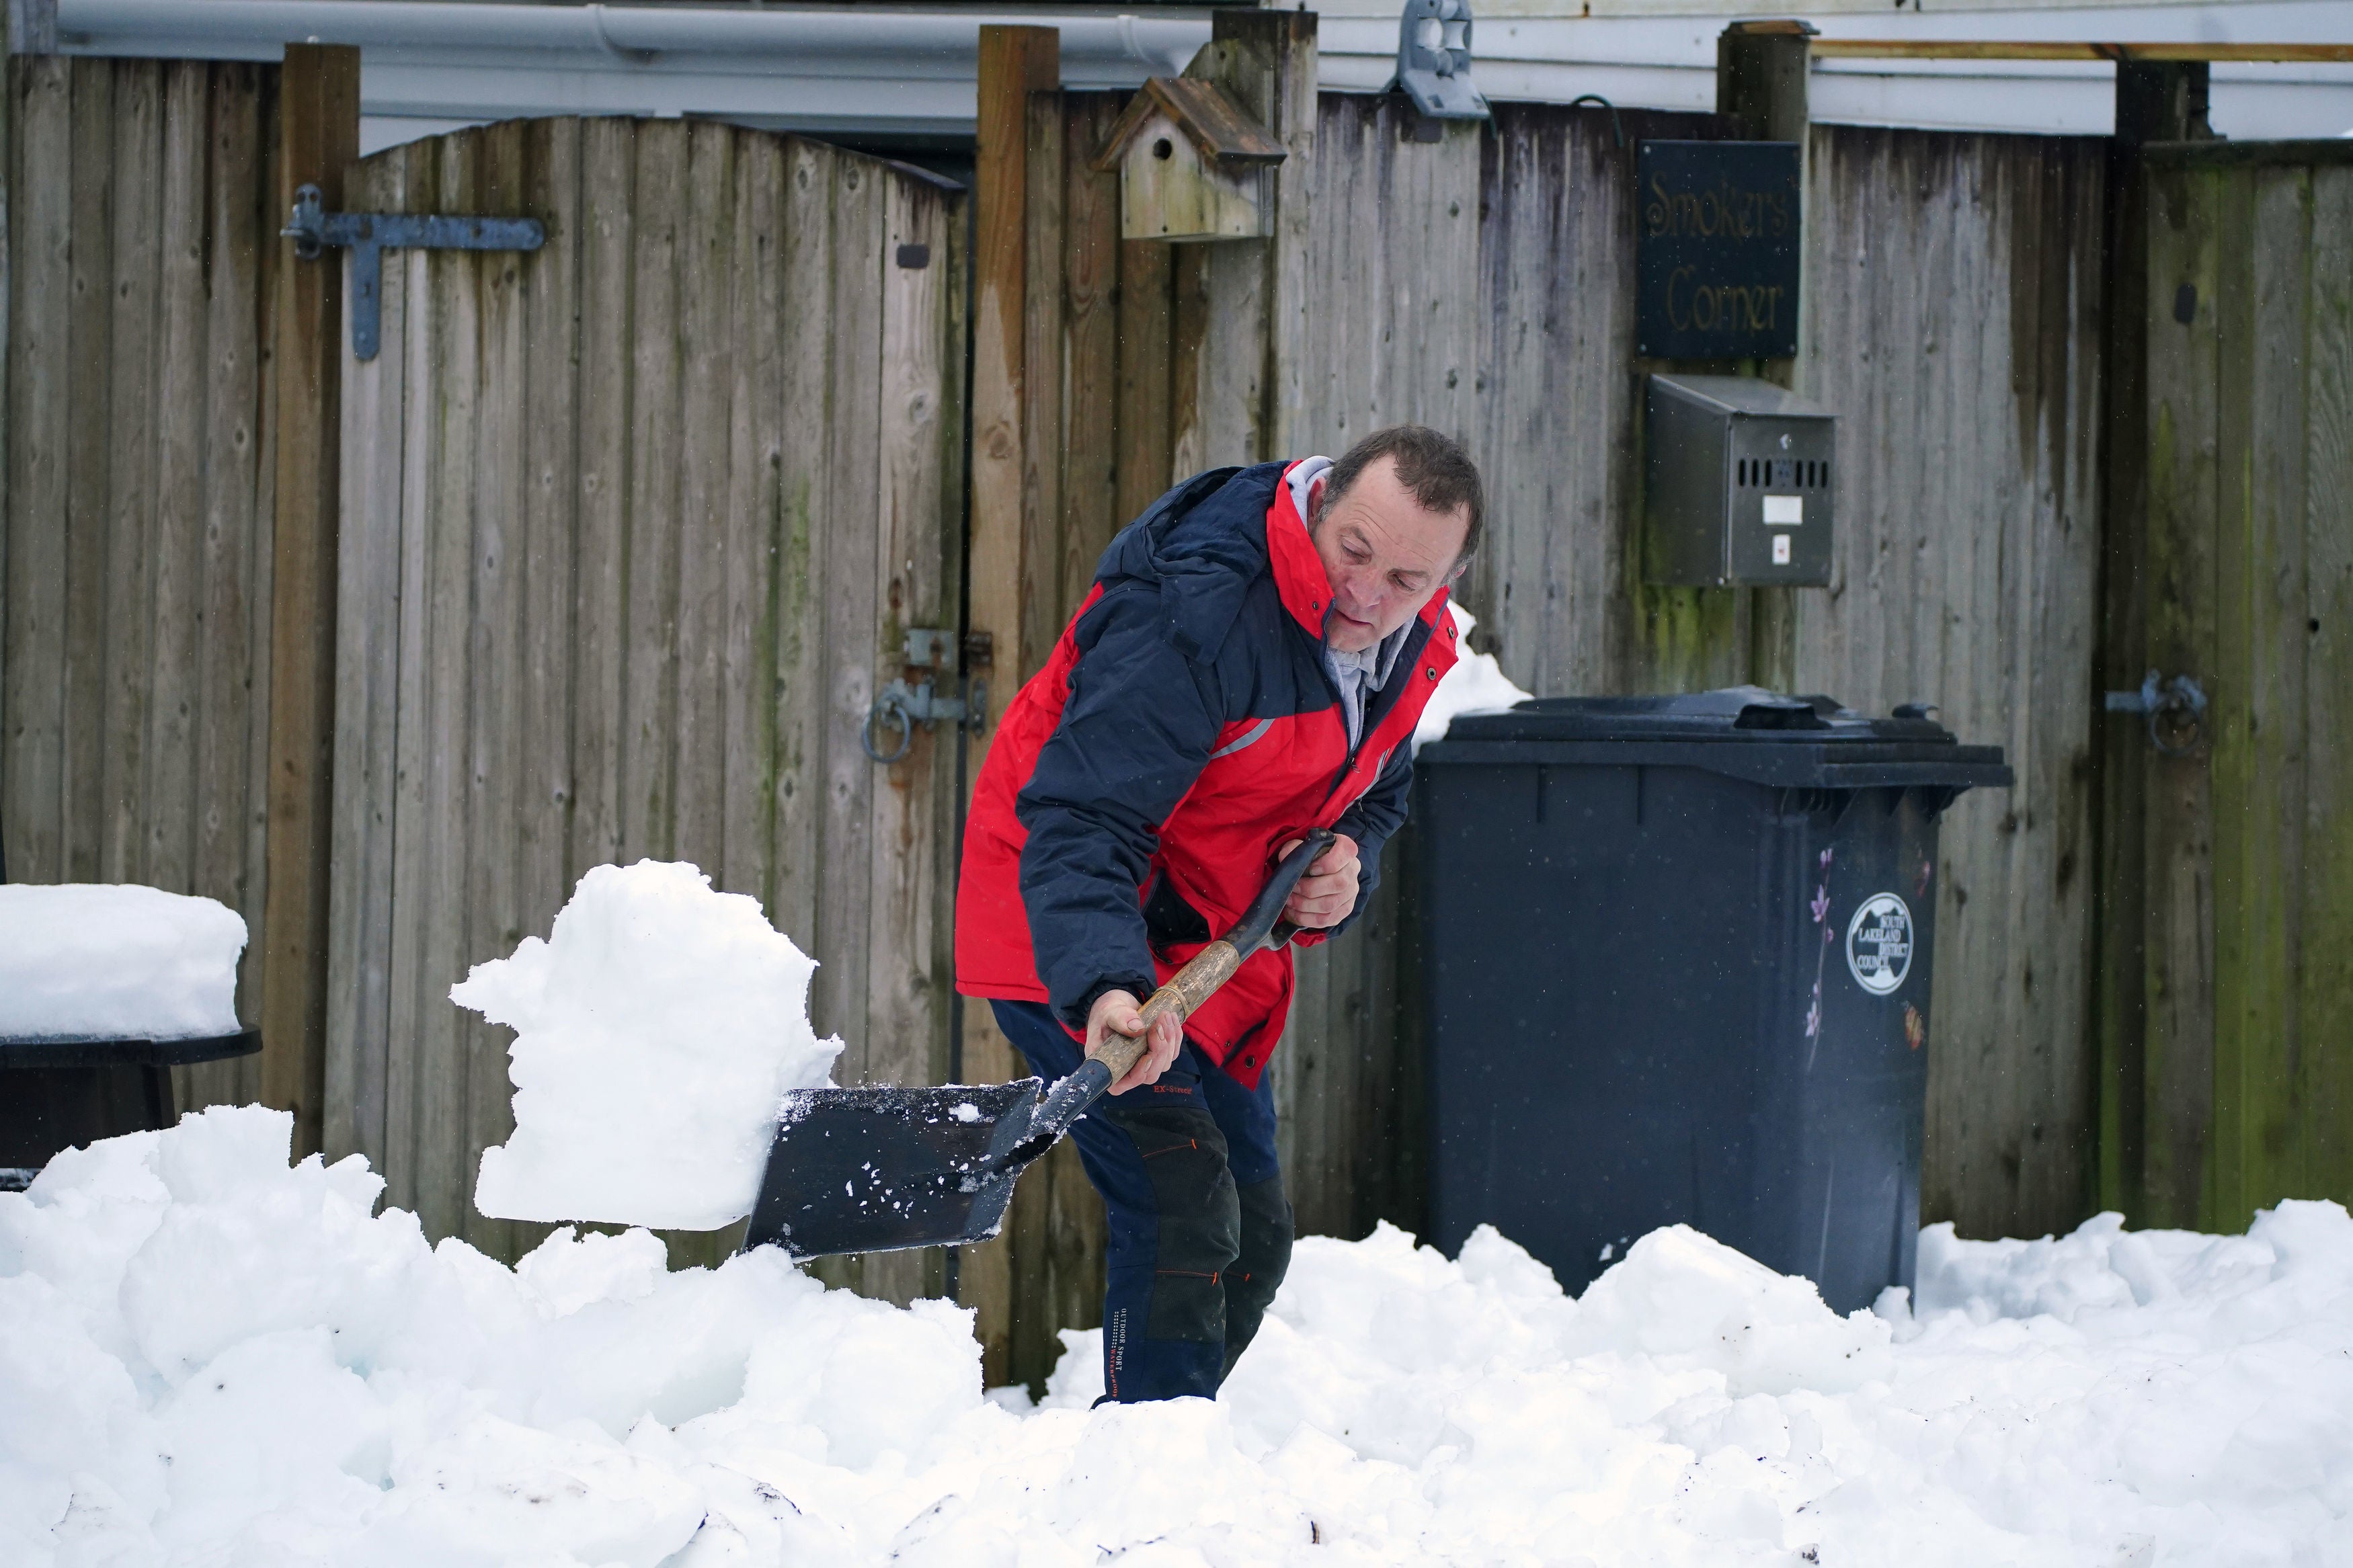 Shoveling snow in Ings, Cumbria. More than 830 properties in the county were still without power after heavy weekend snow